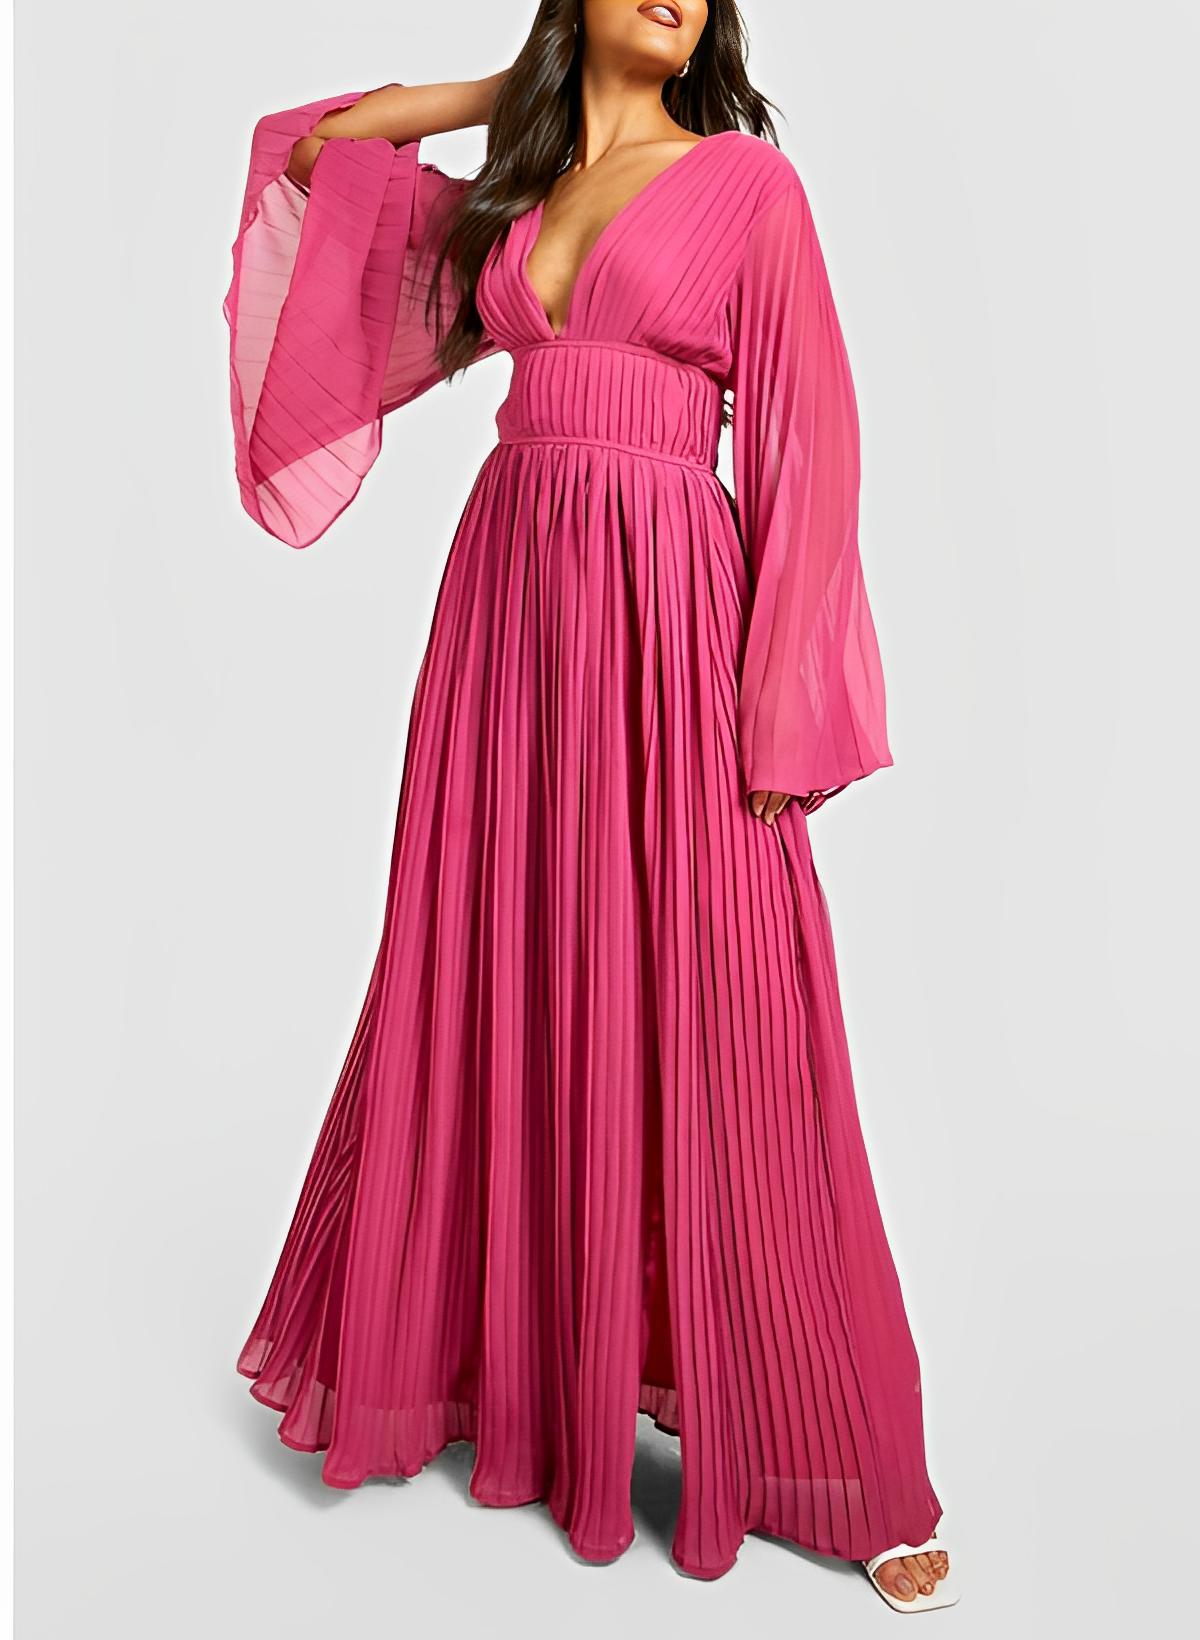 Beach Boho V-Neck Long Sleeves Floor-Length Chiffon Mother Of The Bride Dresses With Pleated